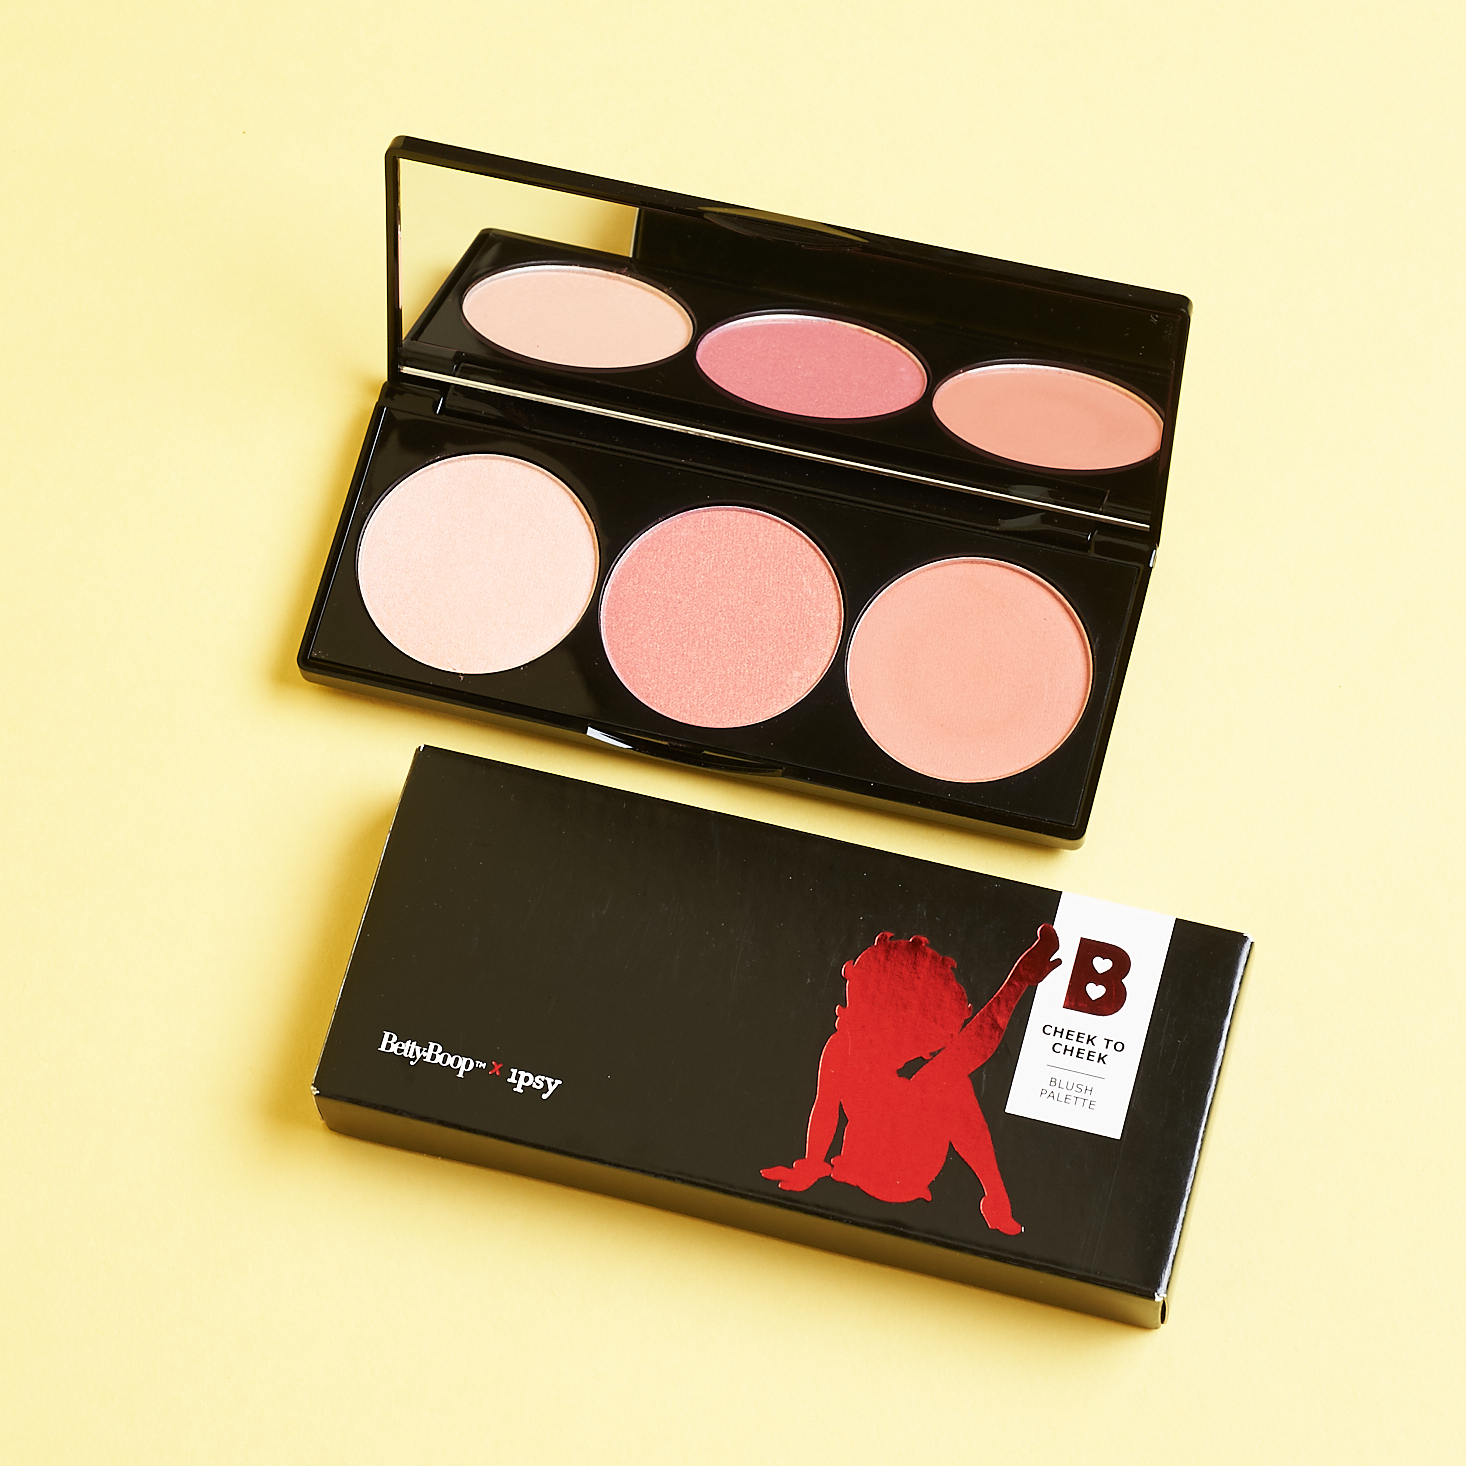 trip of betty boop blushes